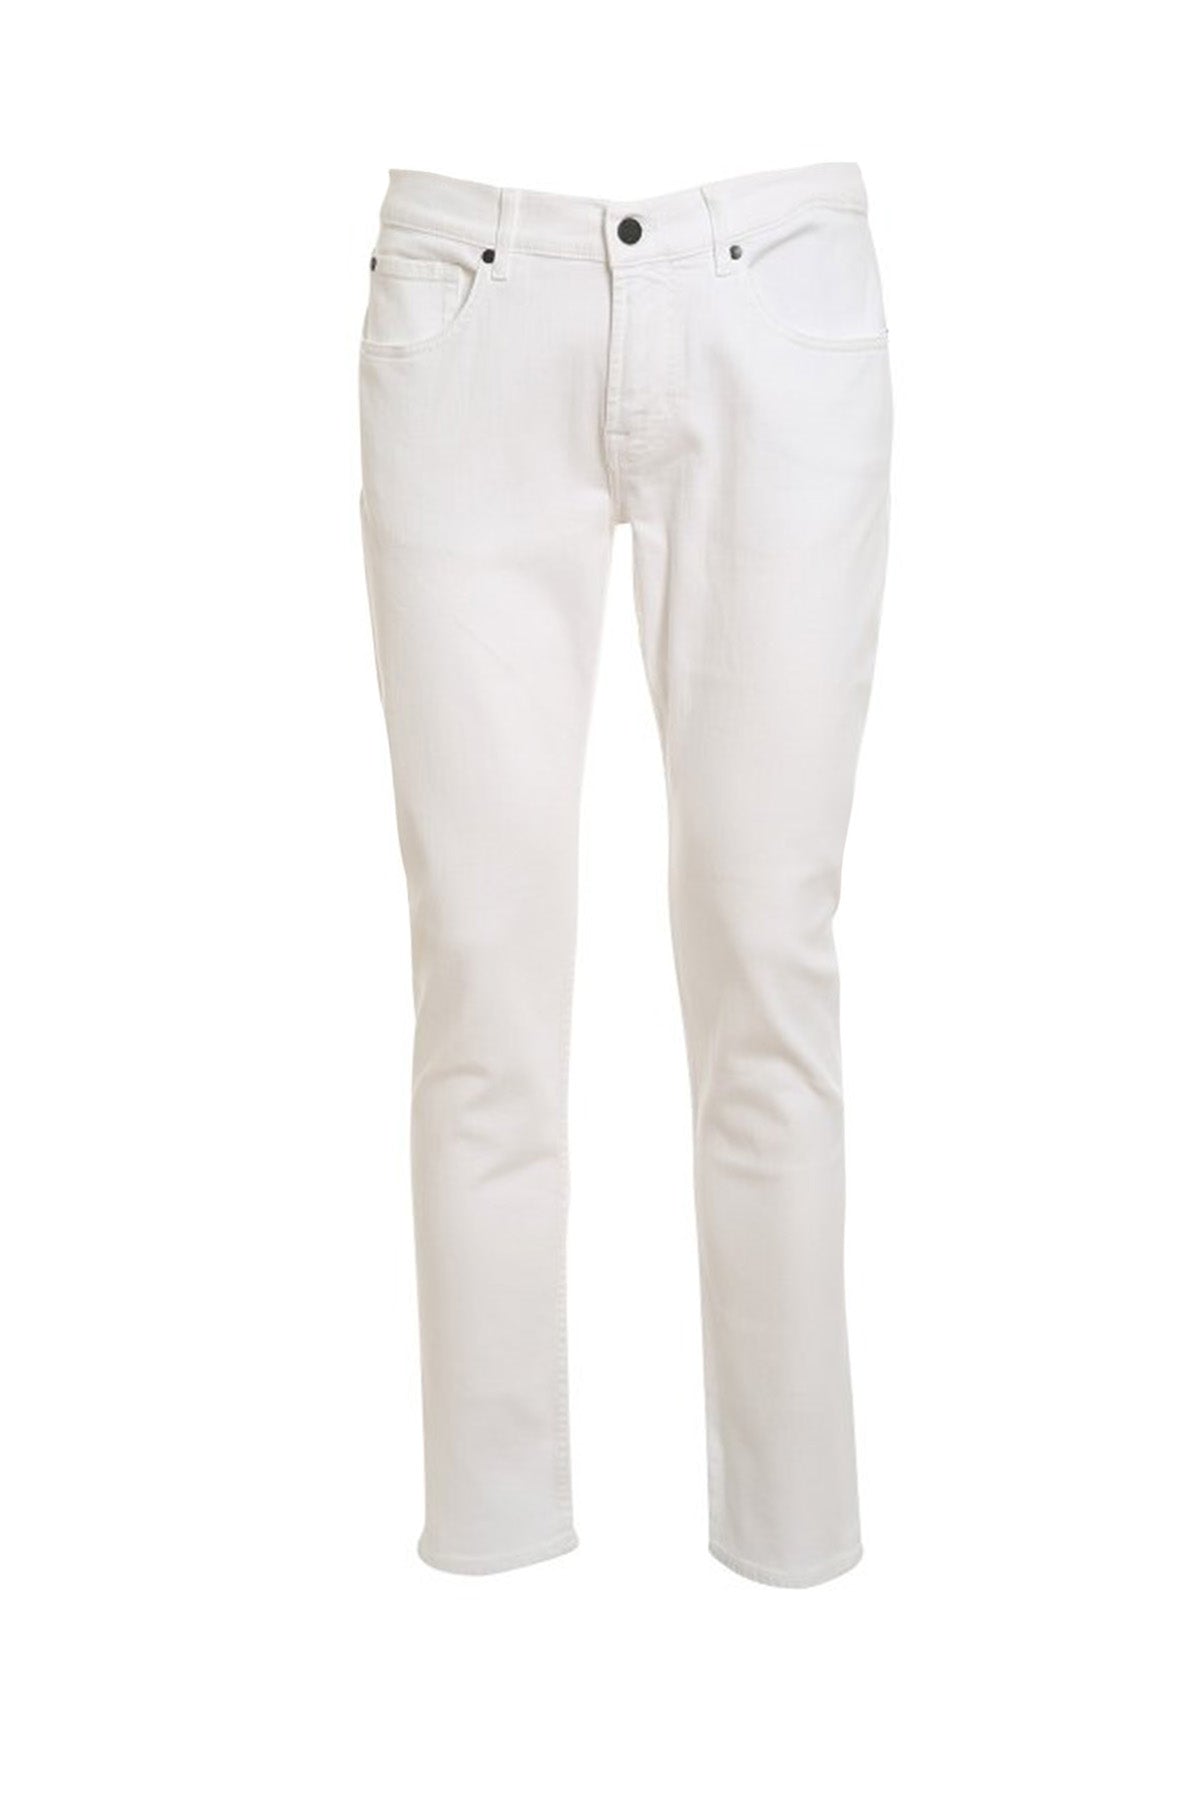 7 For All Mankind Modern Slimmy Tapered Luxe Performance Jeans-Libas Trendy Fashion Store